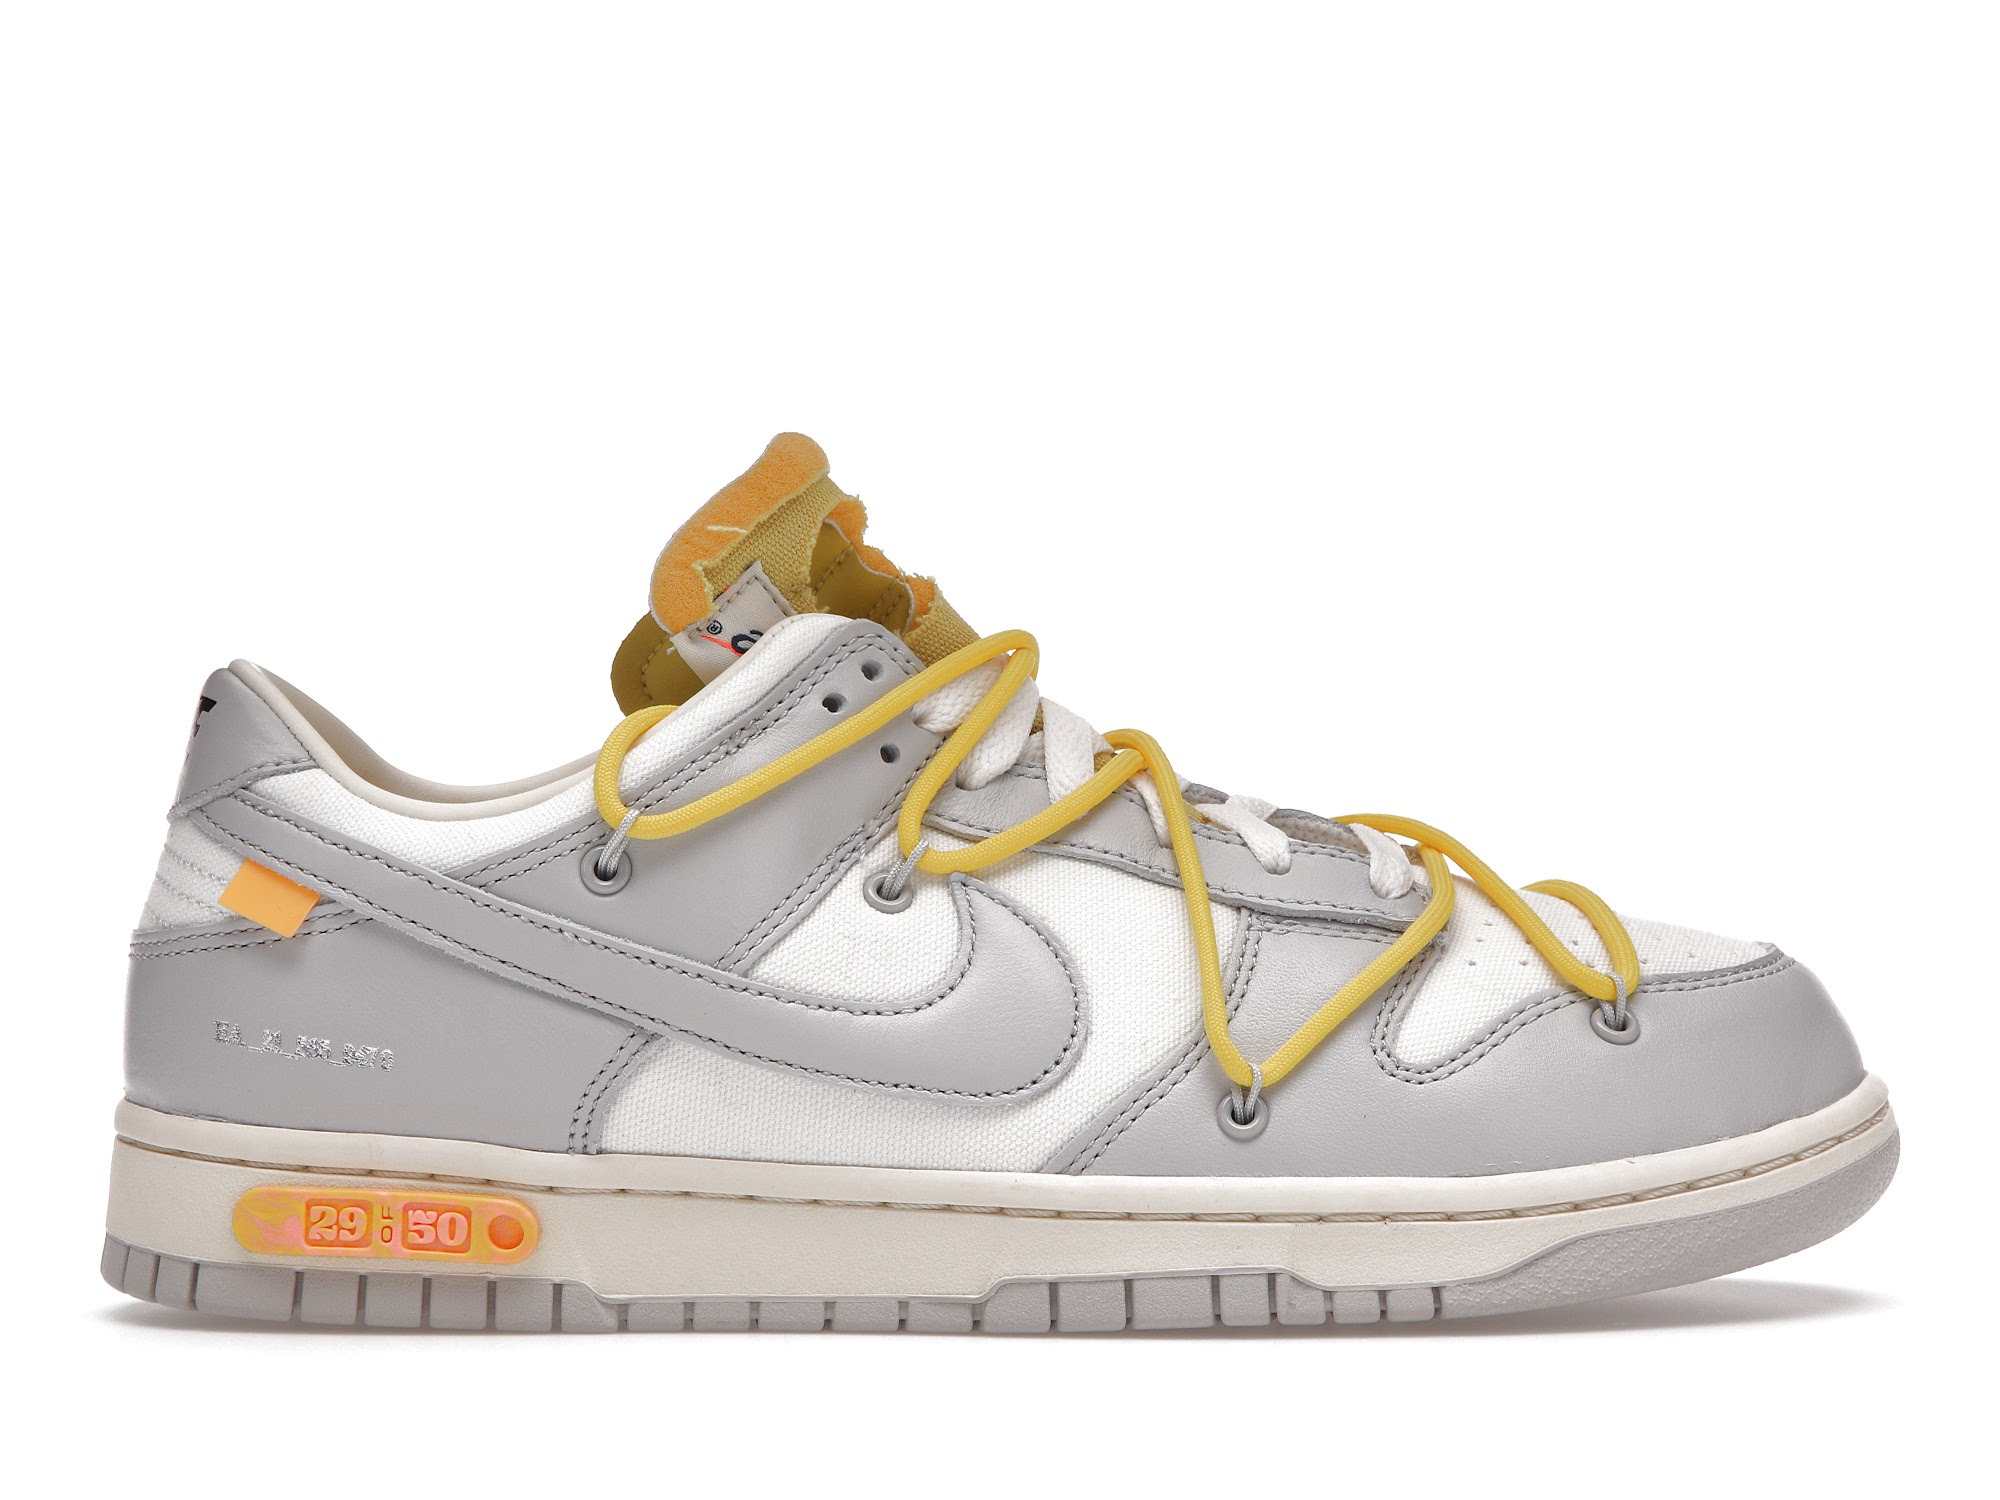 NIKE 29 Dunk low x off white